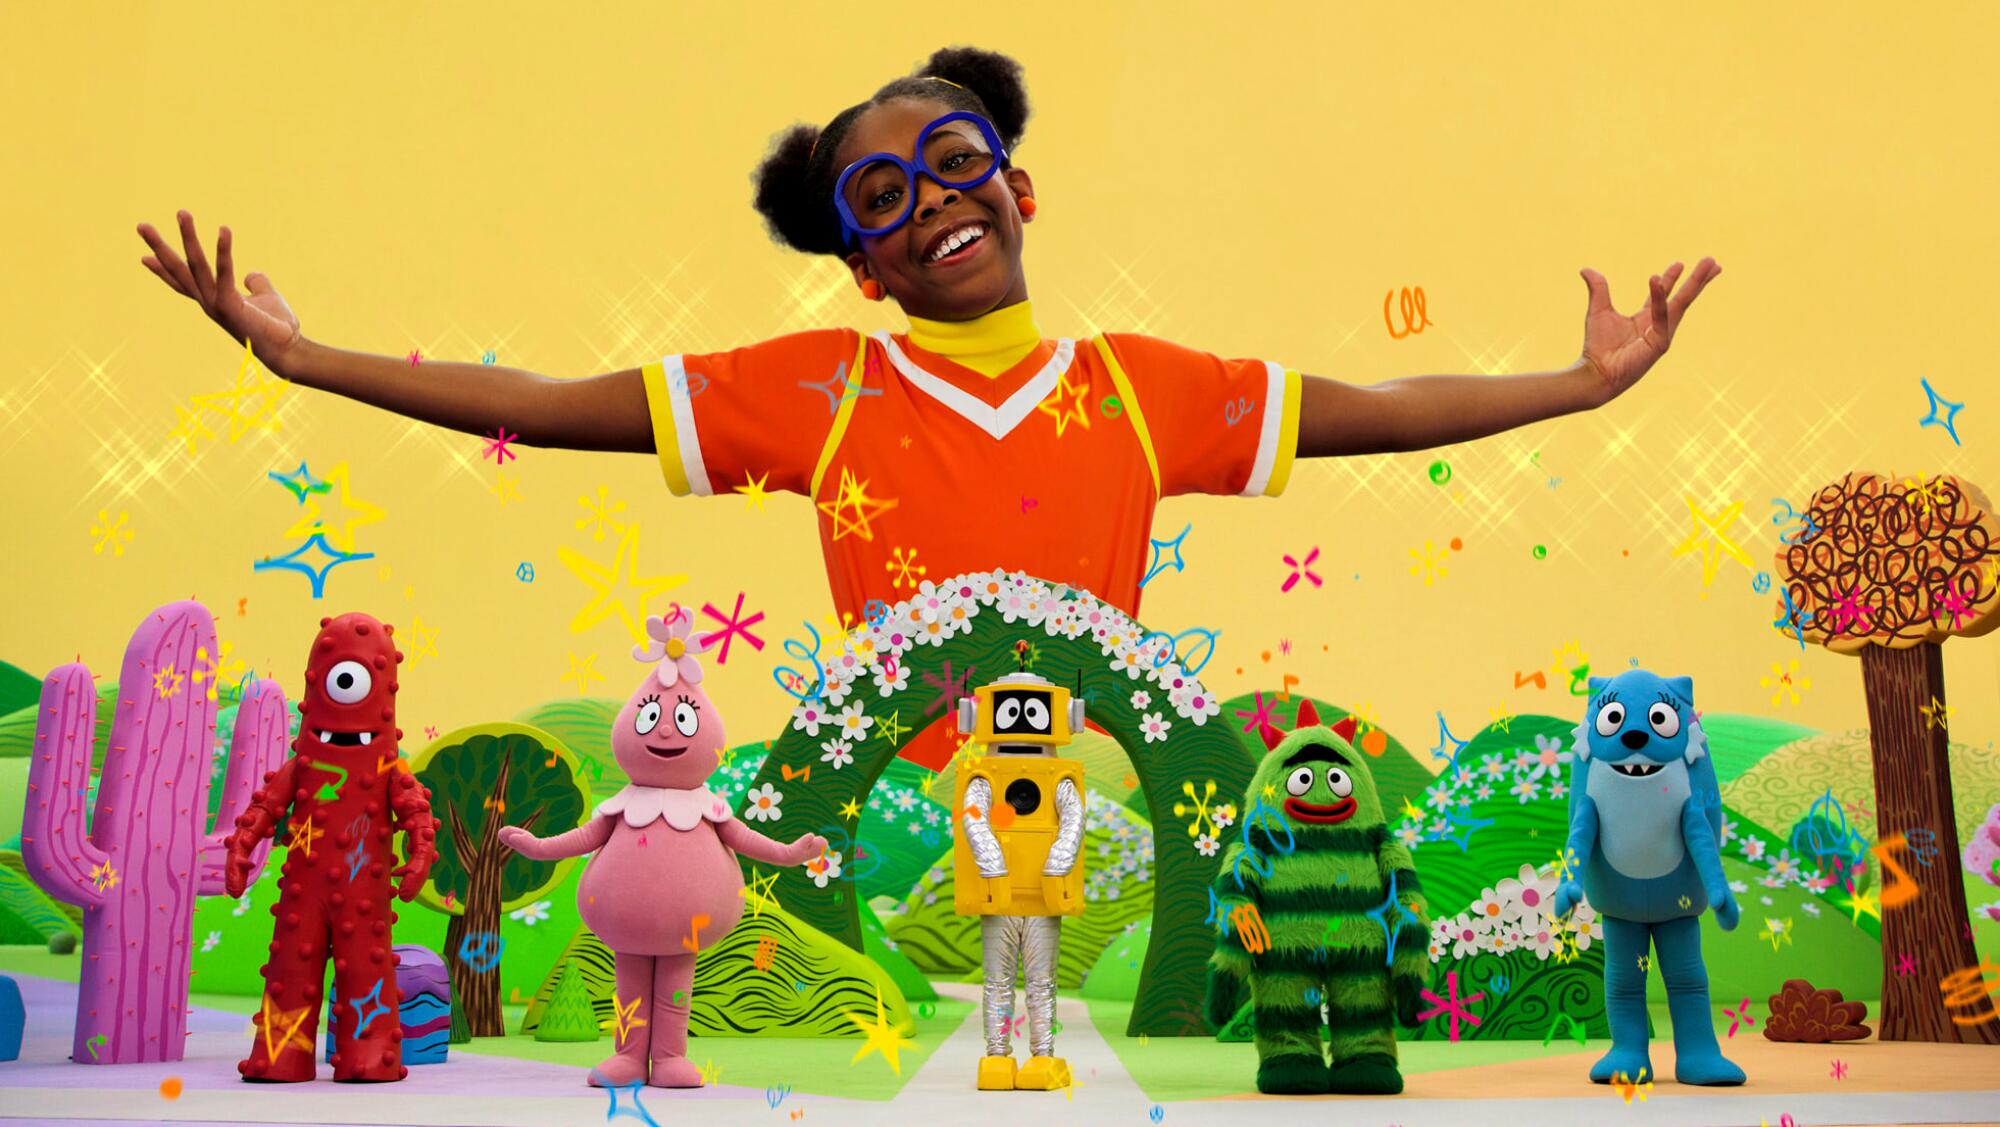 A girl in blue glasses and an orange top stands with her arms extended over five puppets.